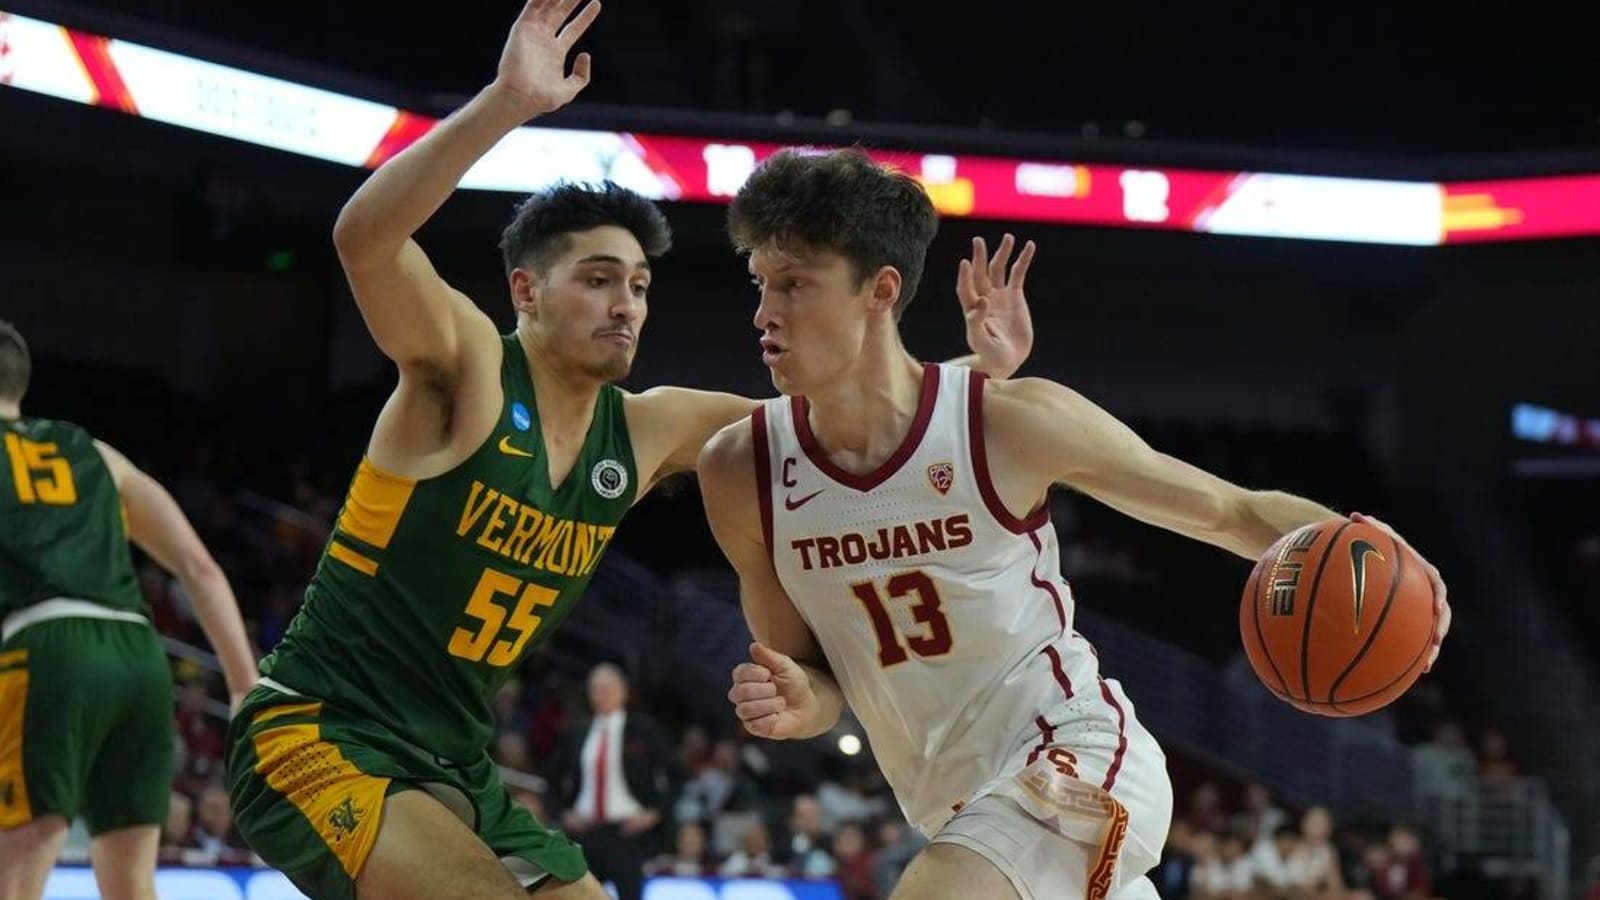 USC overtakes Vermont in second half